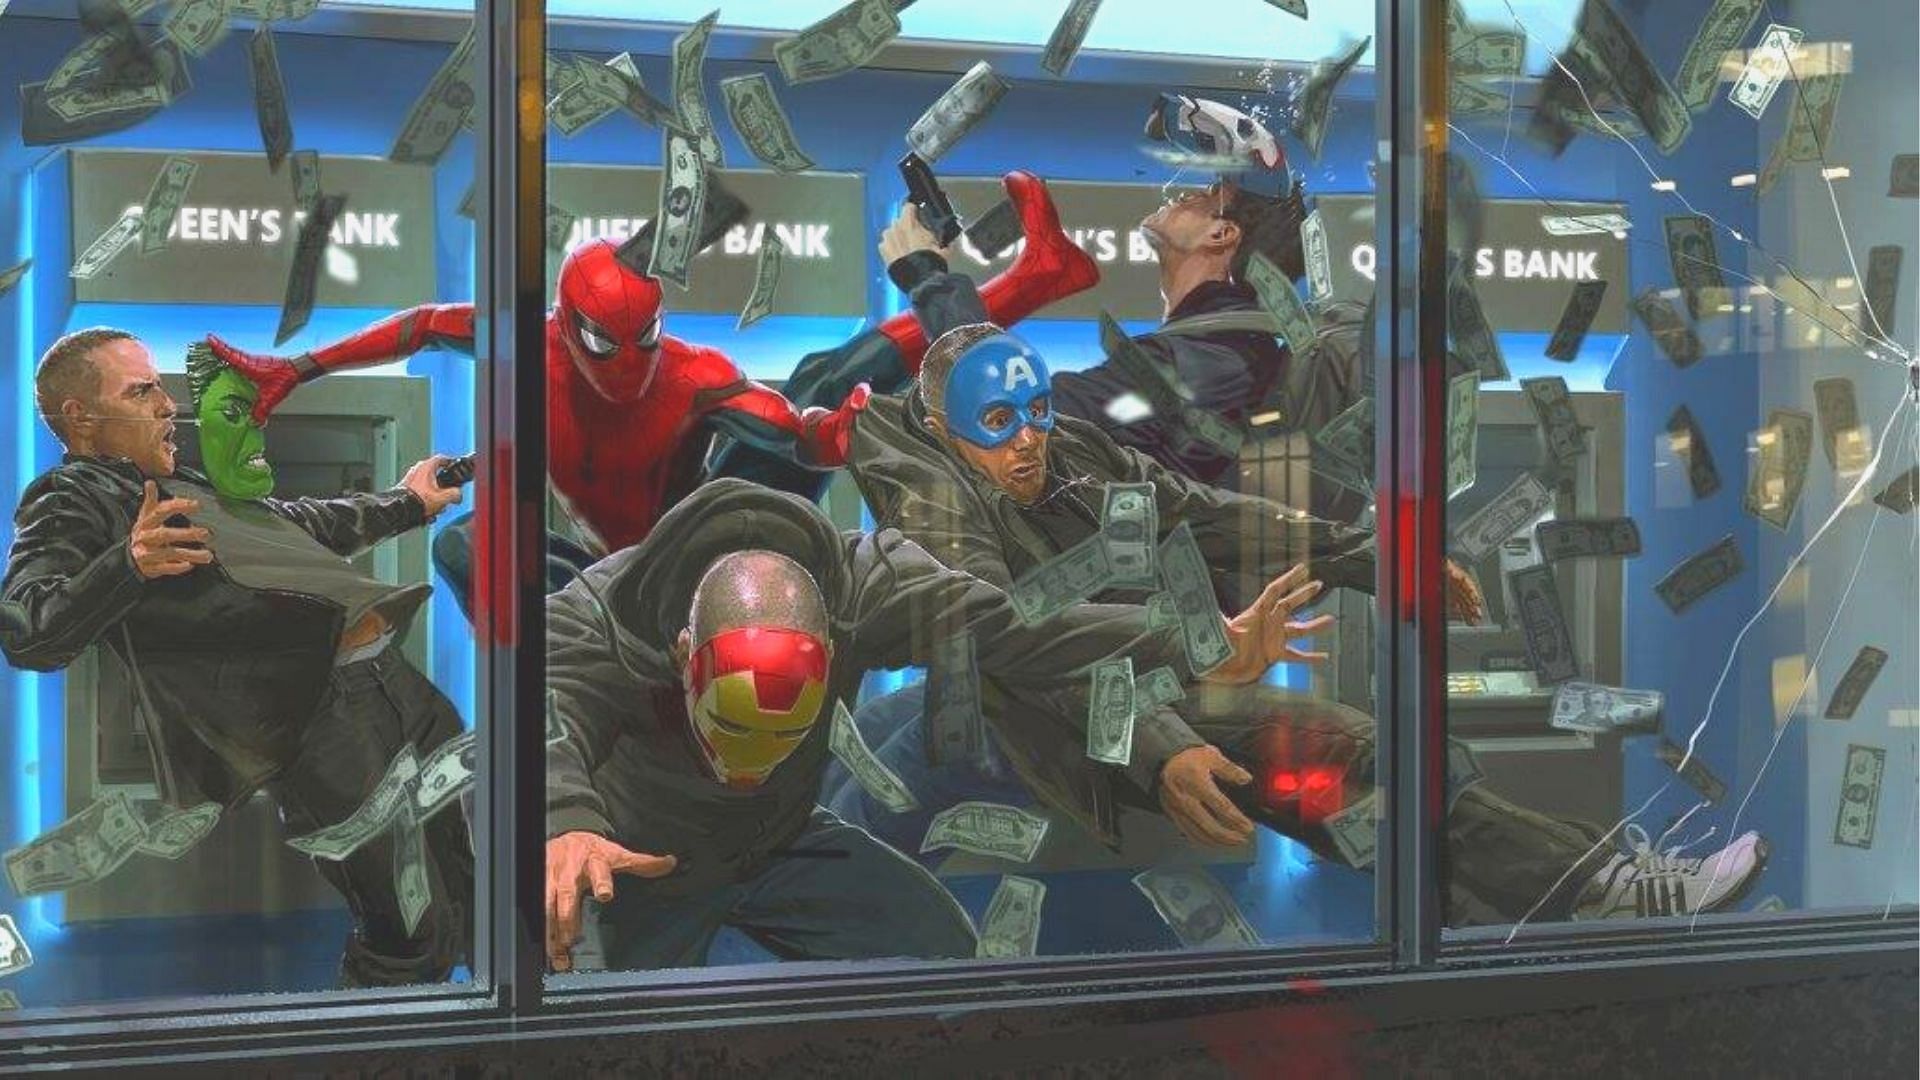 Spider-Man stopping bank robbers in concept art for Spider-Man: Homecoming (Image Credit: Ryan Meinerding/Marvel Studios)